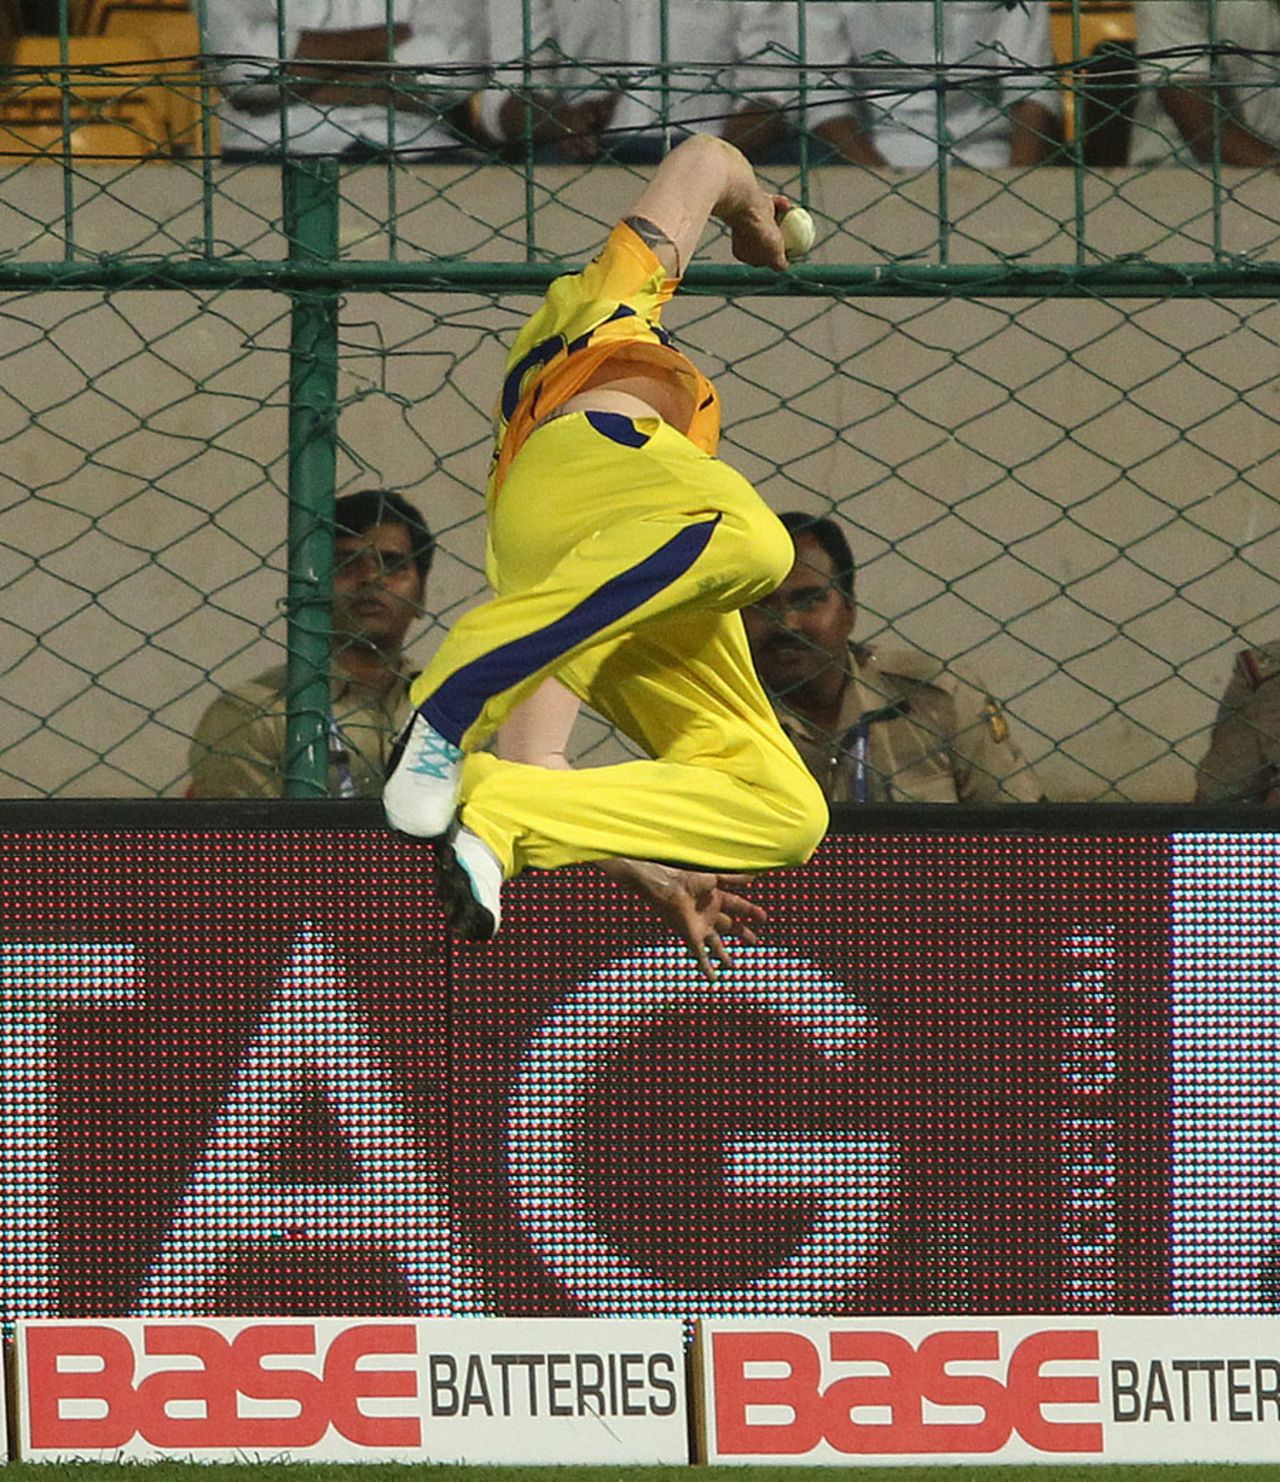 Part 3 - Brendon McCullum twists his body after catching the ball, Chennai Super Kings v Dolphins, CLT20, Group A, Bangalore, September 22, 2014